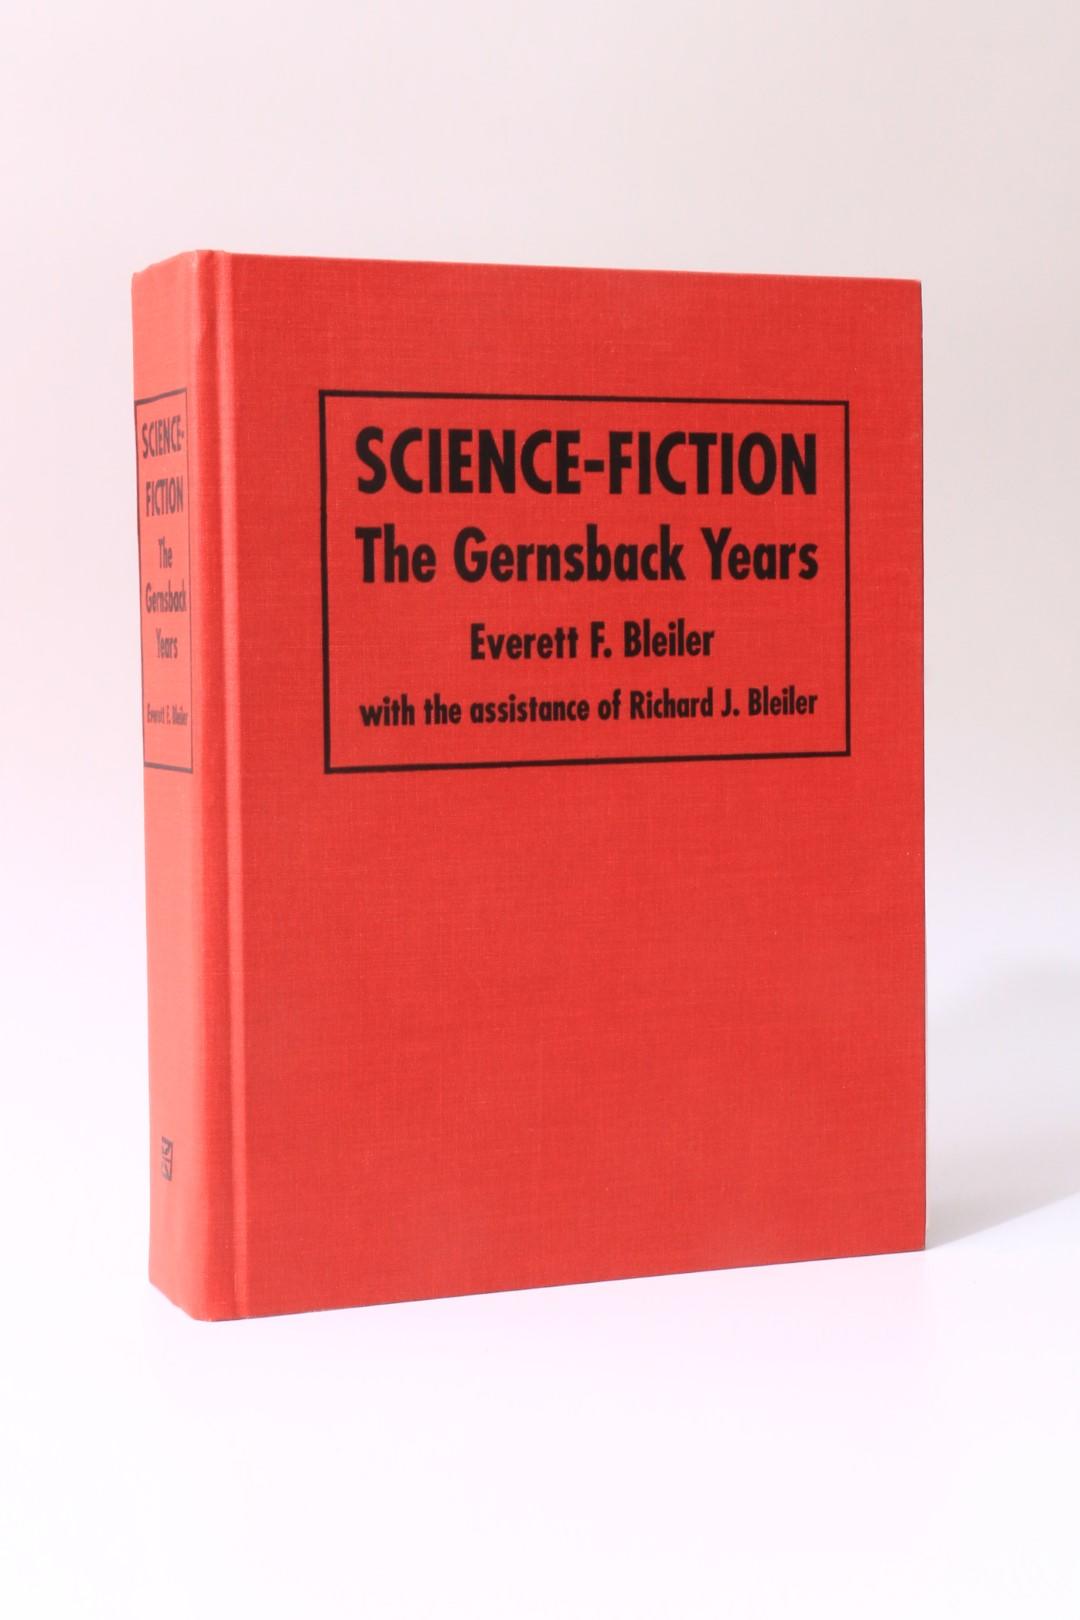 Everett F. and Richard J. Bleiler - Science Fiction: The Gernsback Years - Kent State University Press, 1998, First Edition.